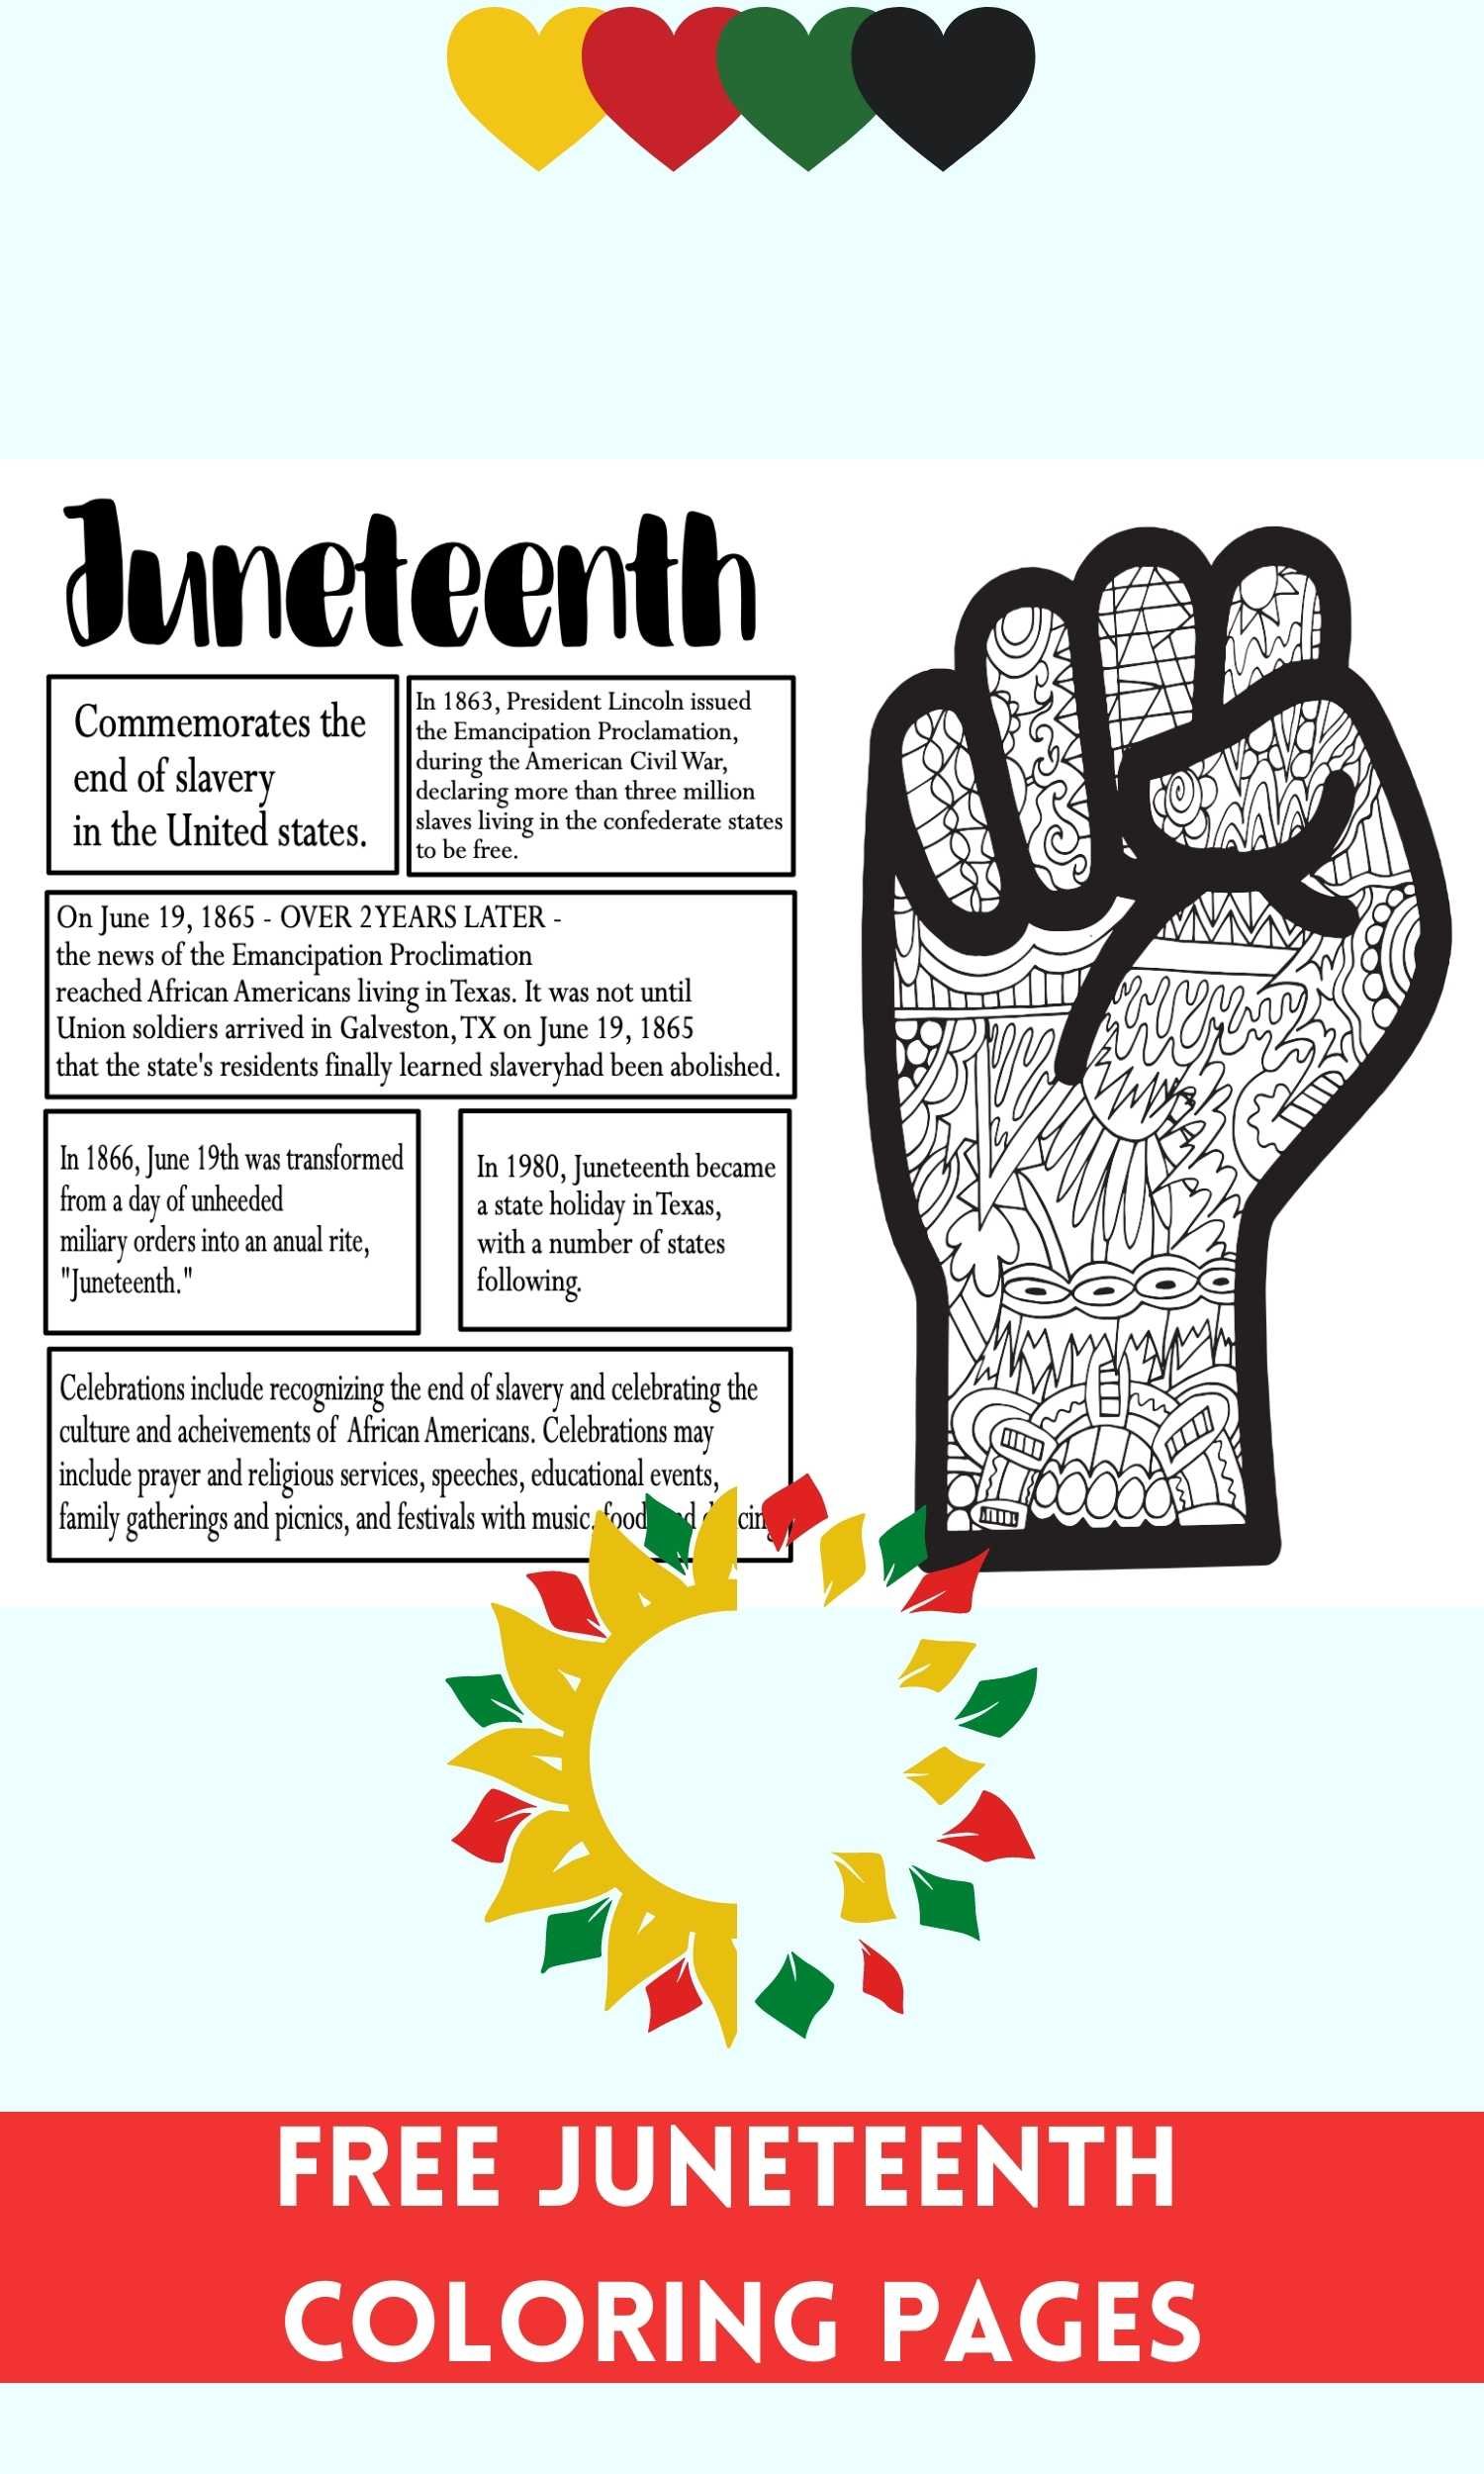 26-juneteenth-coloring-pages-taahermalena